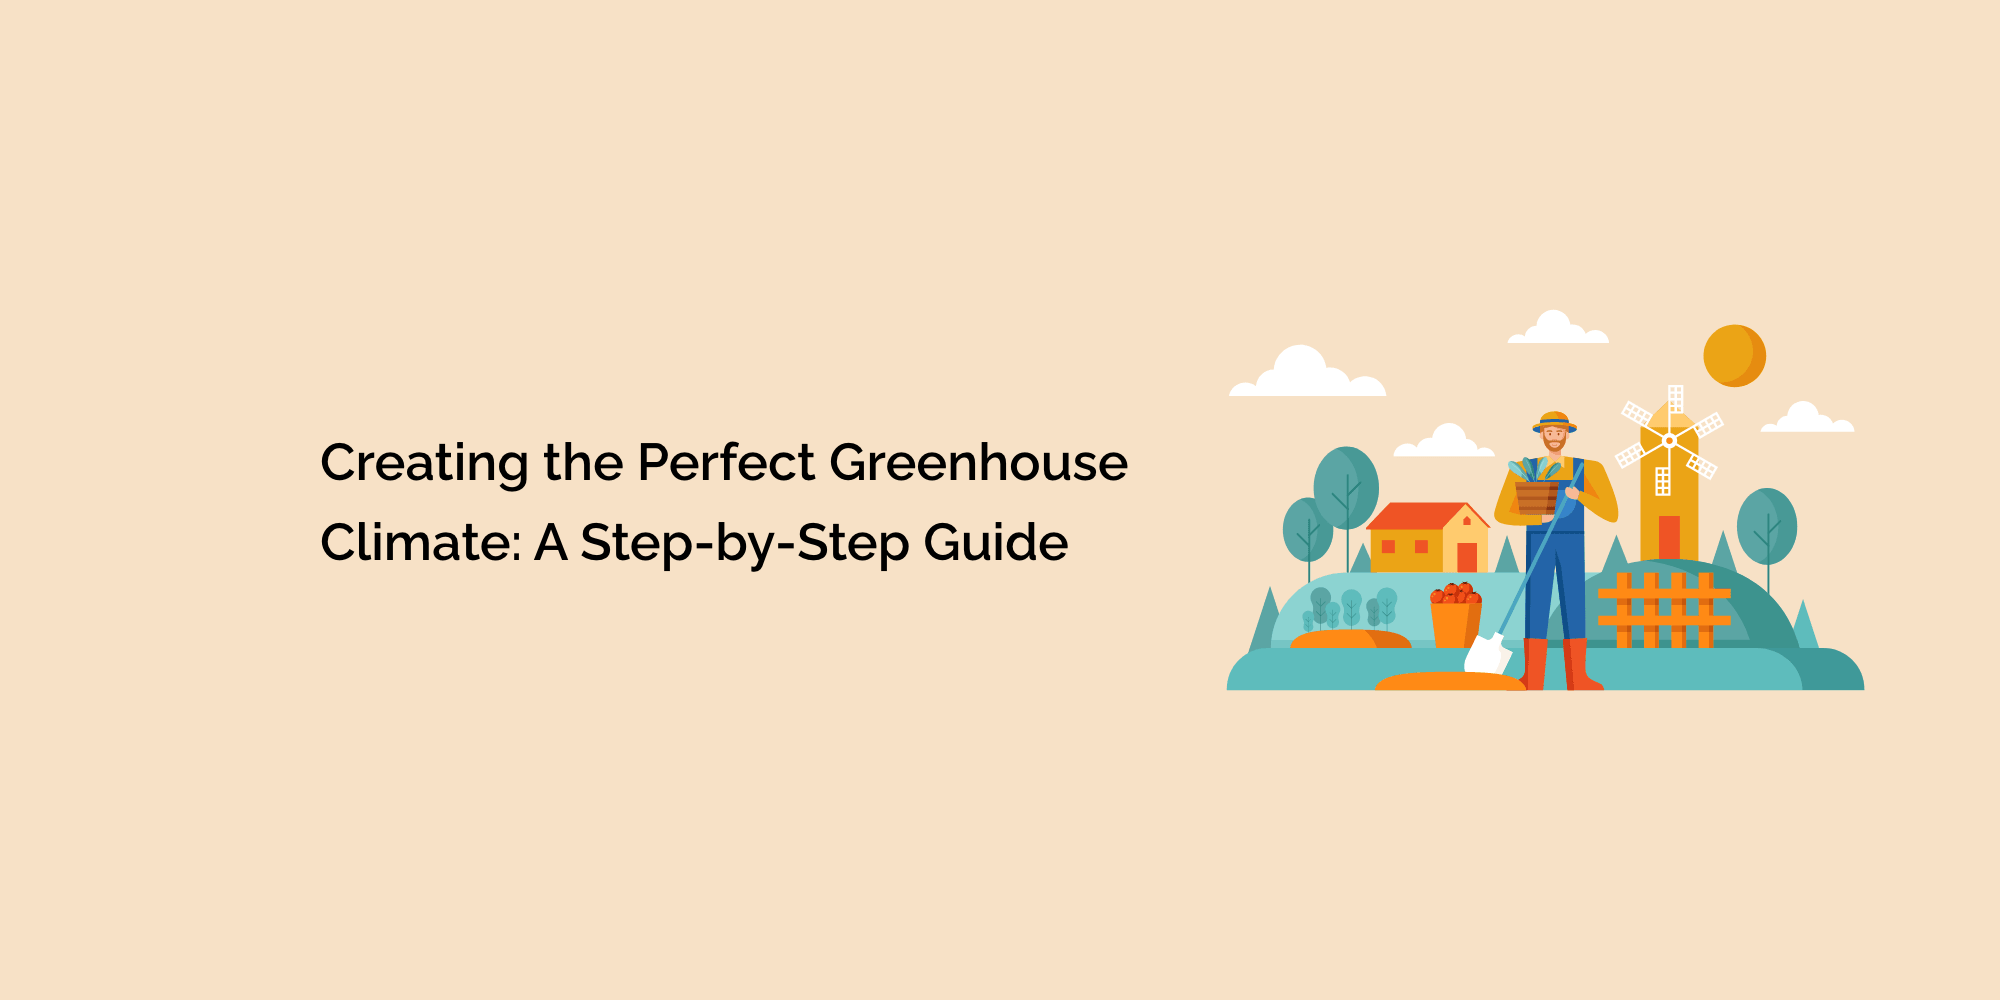 Creating the Perfect Greenhouse Climate: A Step-by-Step Guide